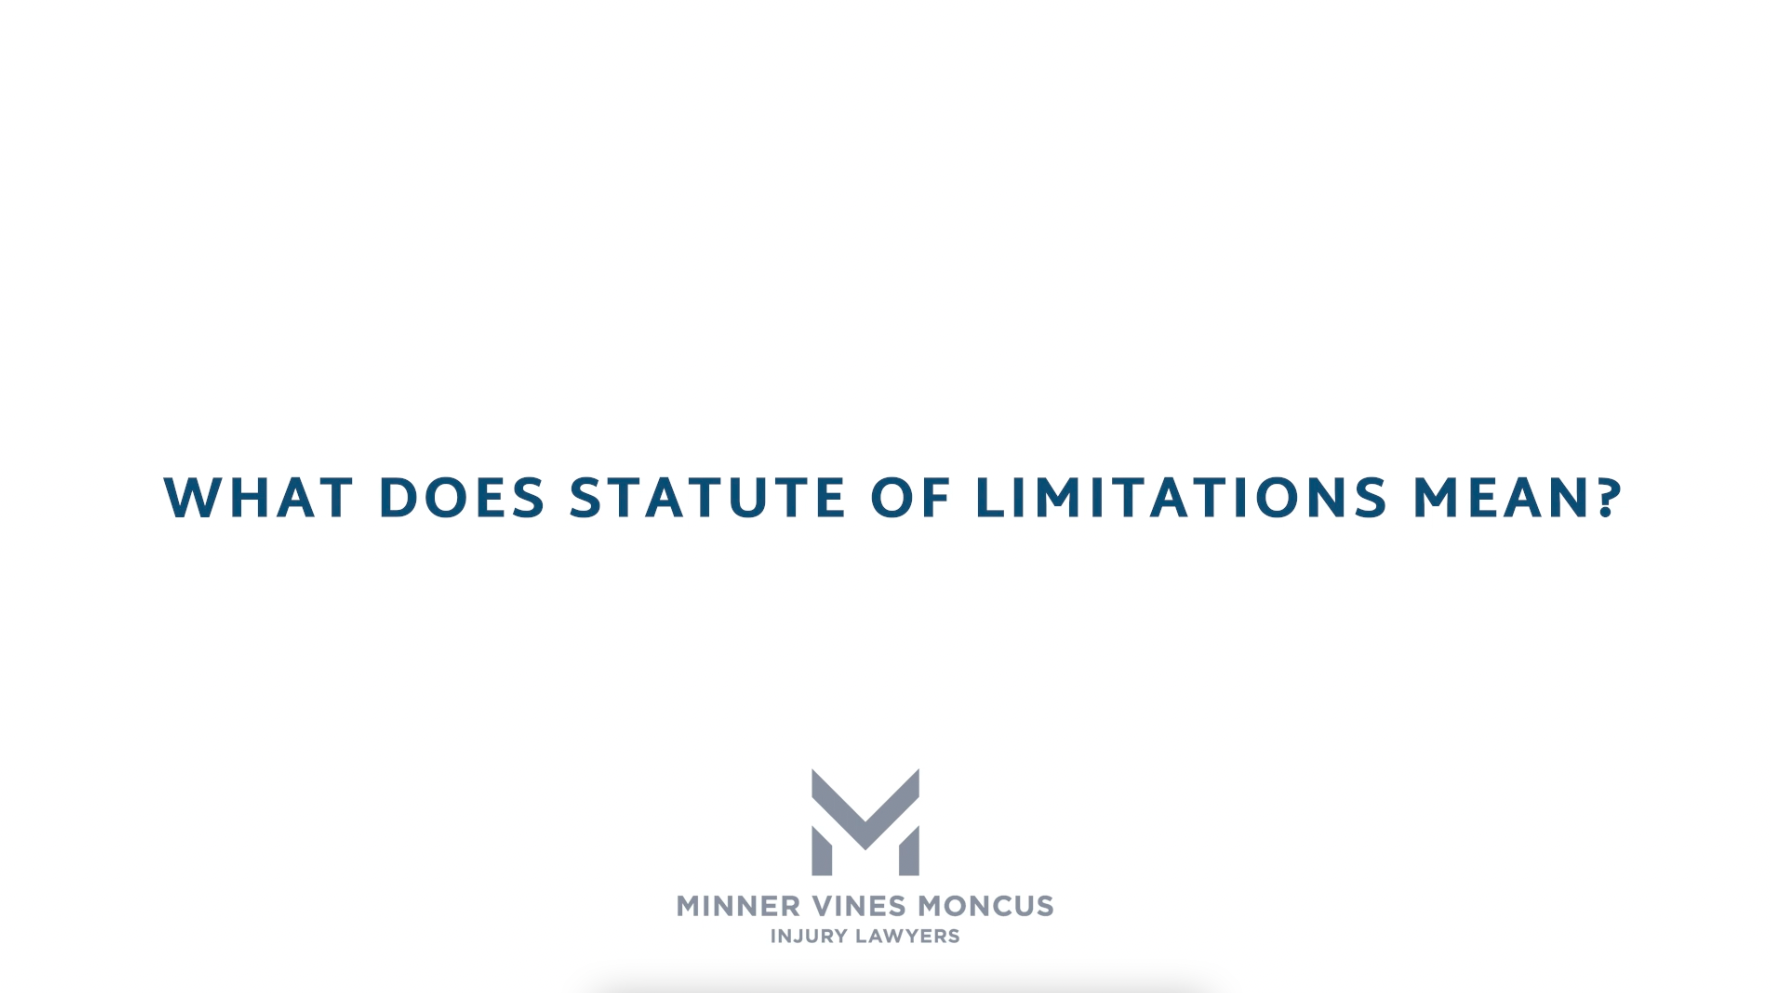 What does statute of limitations mean?